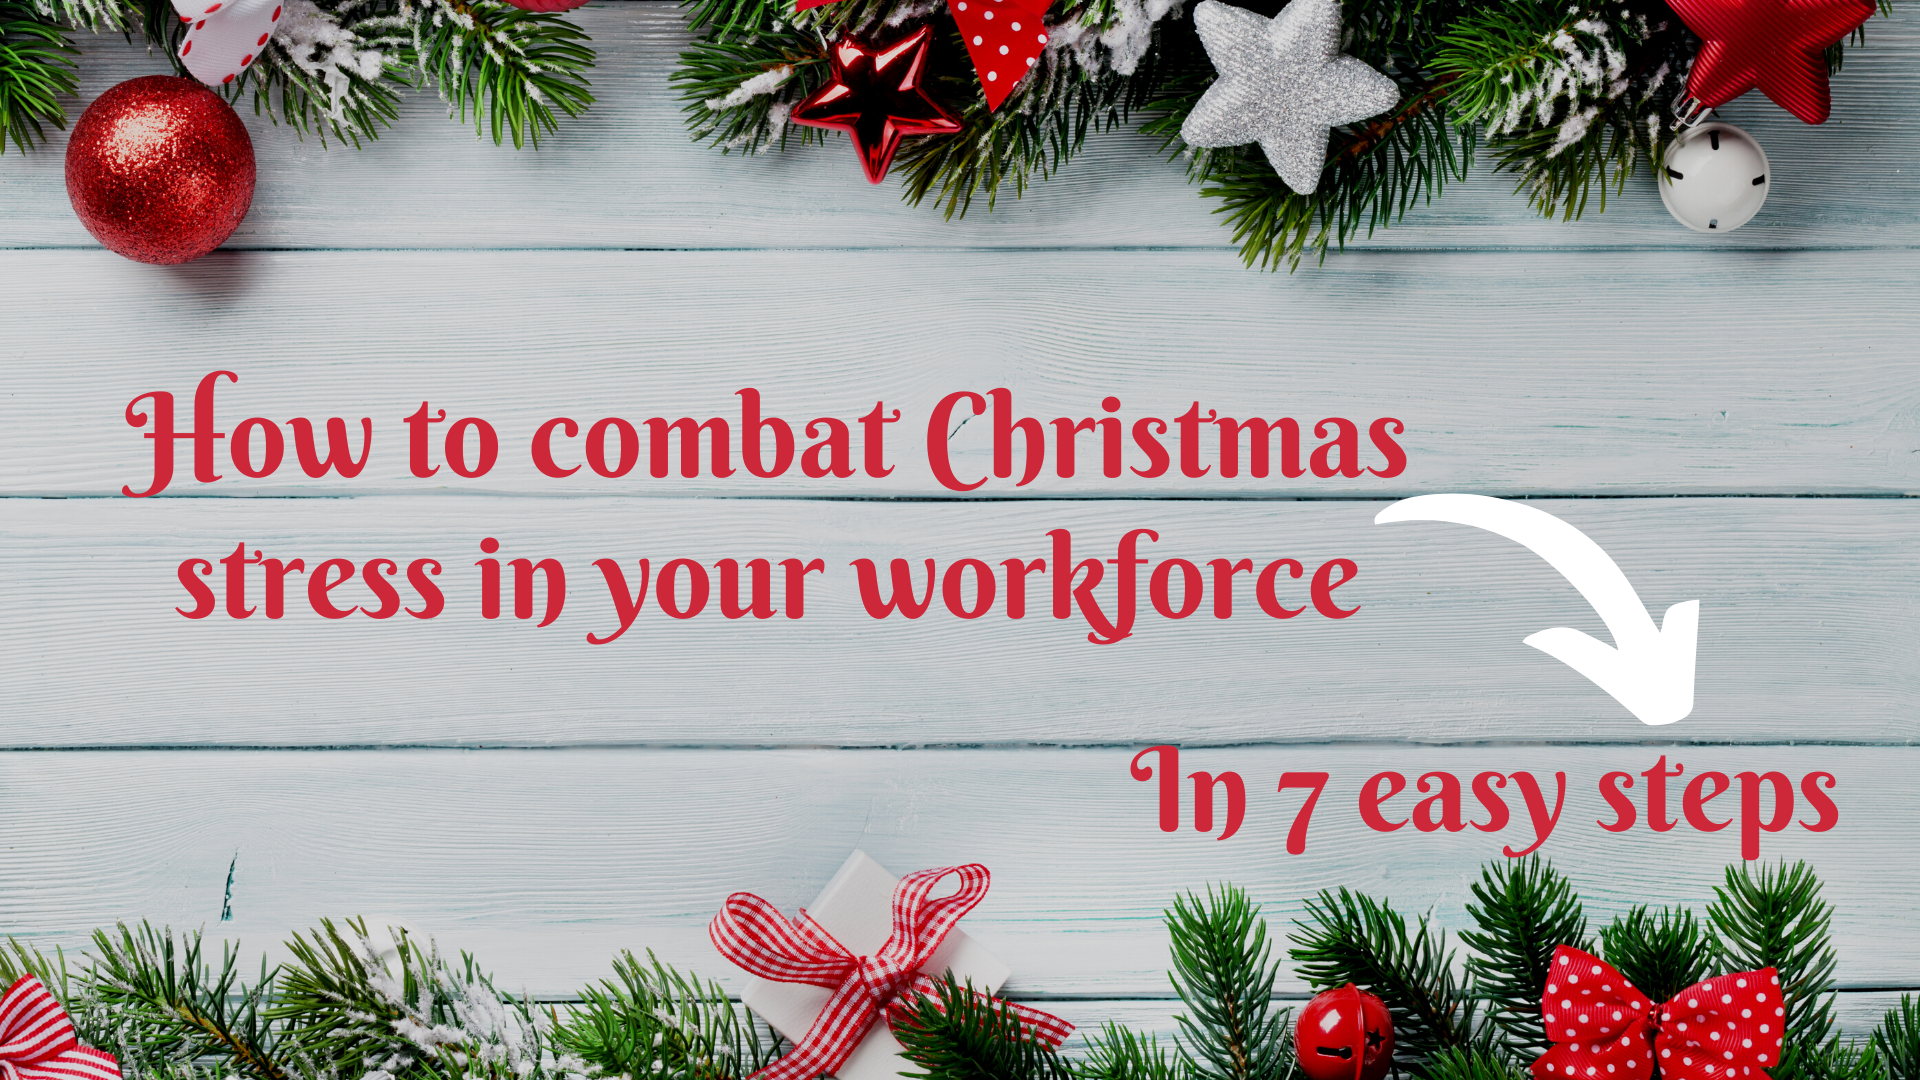 How to combat Christmas stress in your workforce